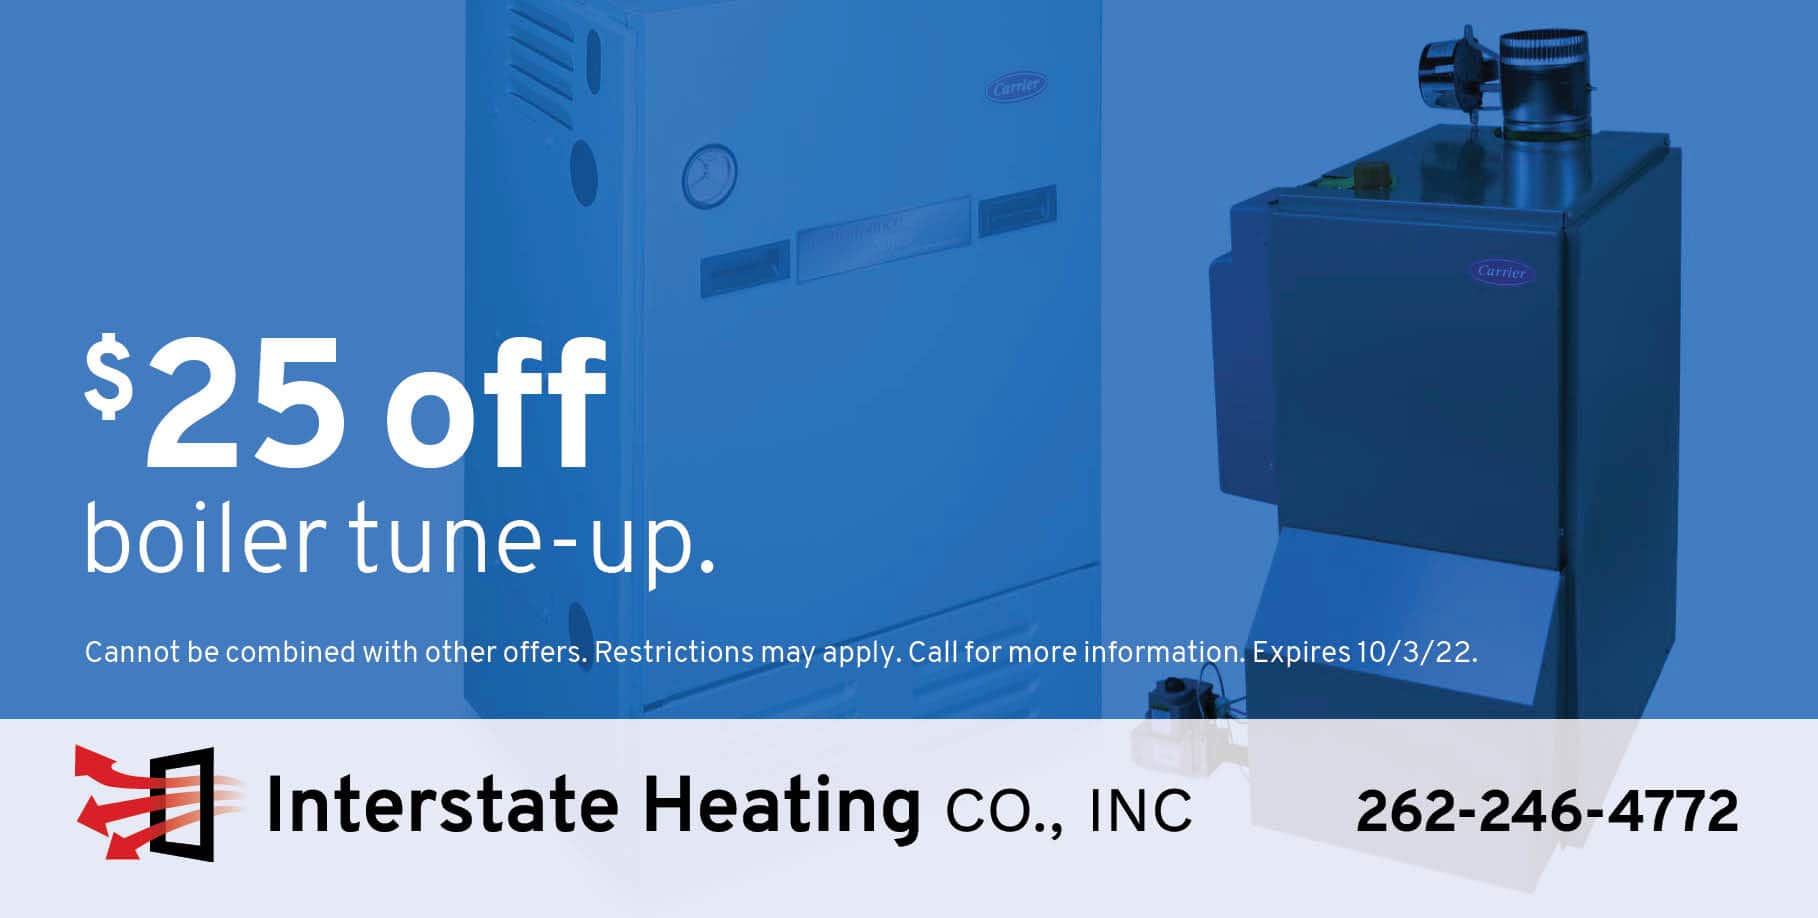 $25 off boiler tune up - Interstate Heating Co, Inc